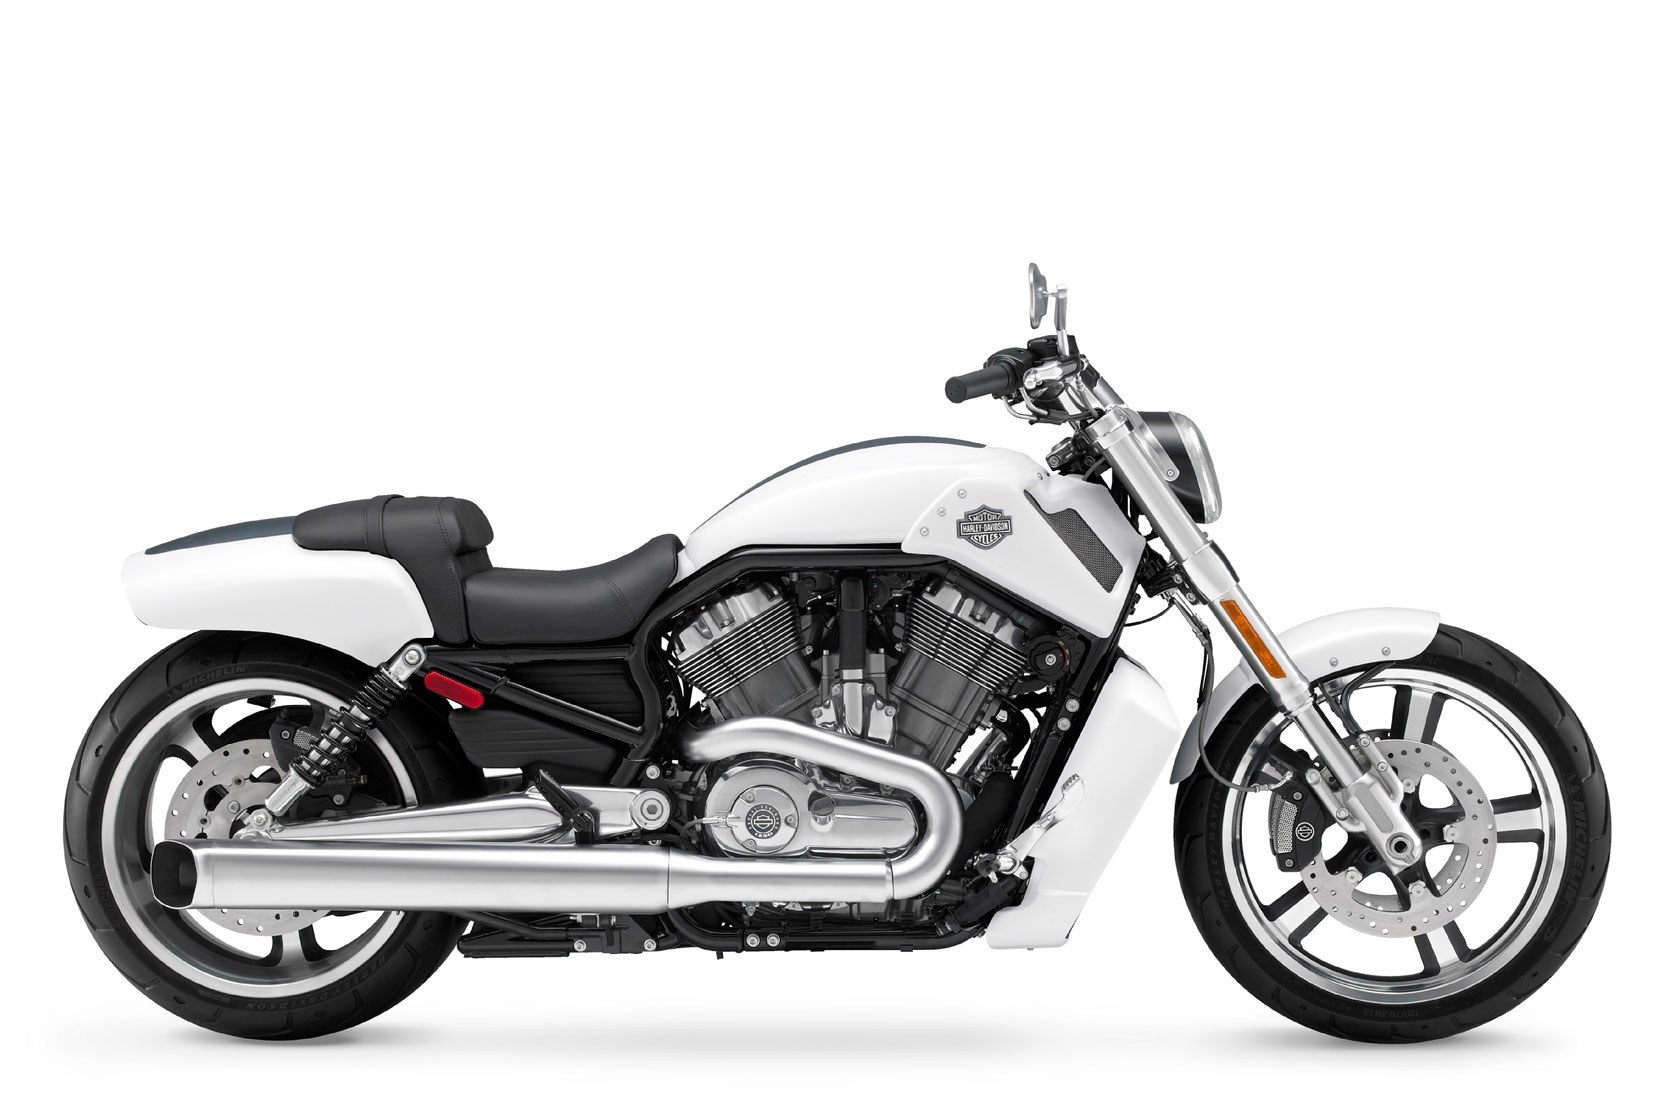 Harley Davidson V Rod Muscle 2011 2012 Specs Performance And Photos Autoevolution 0548